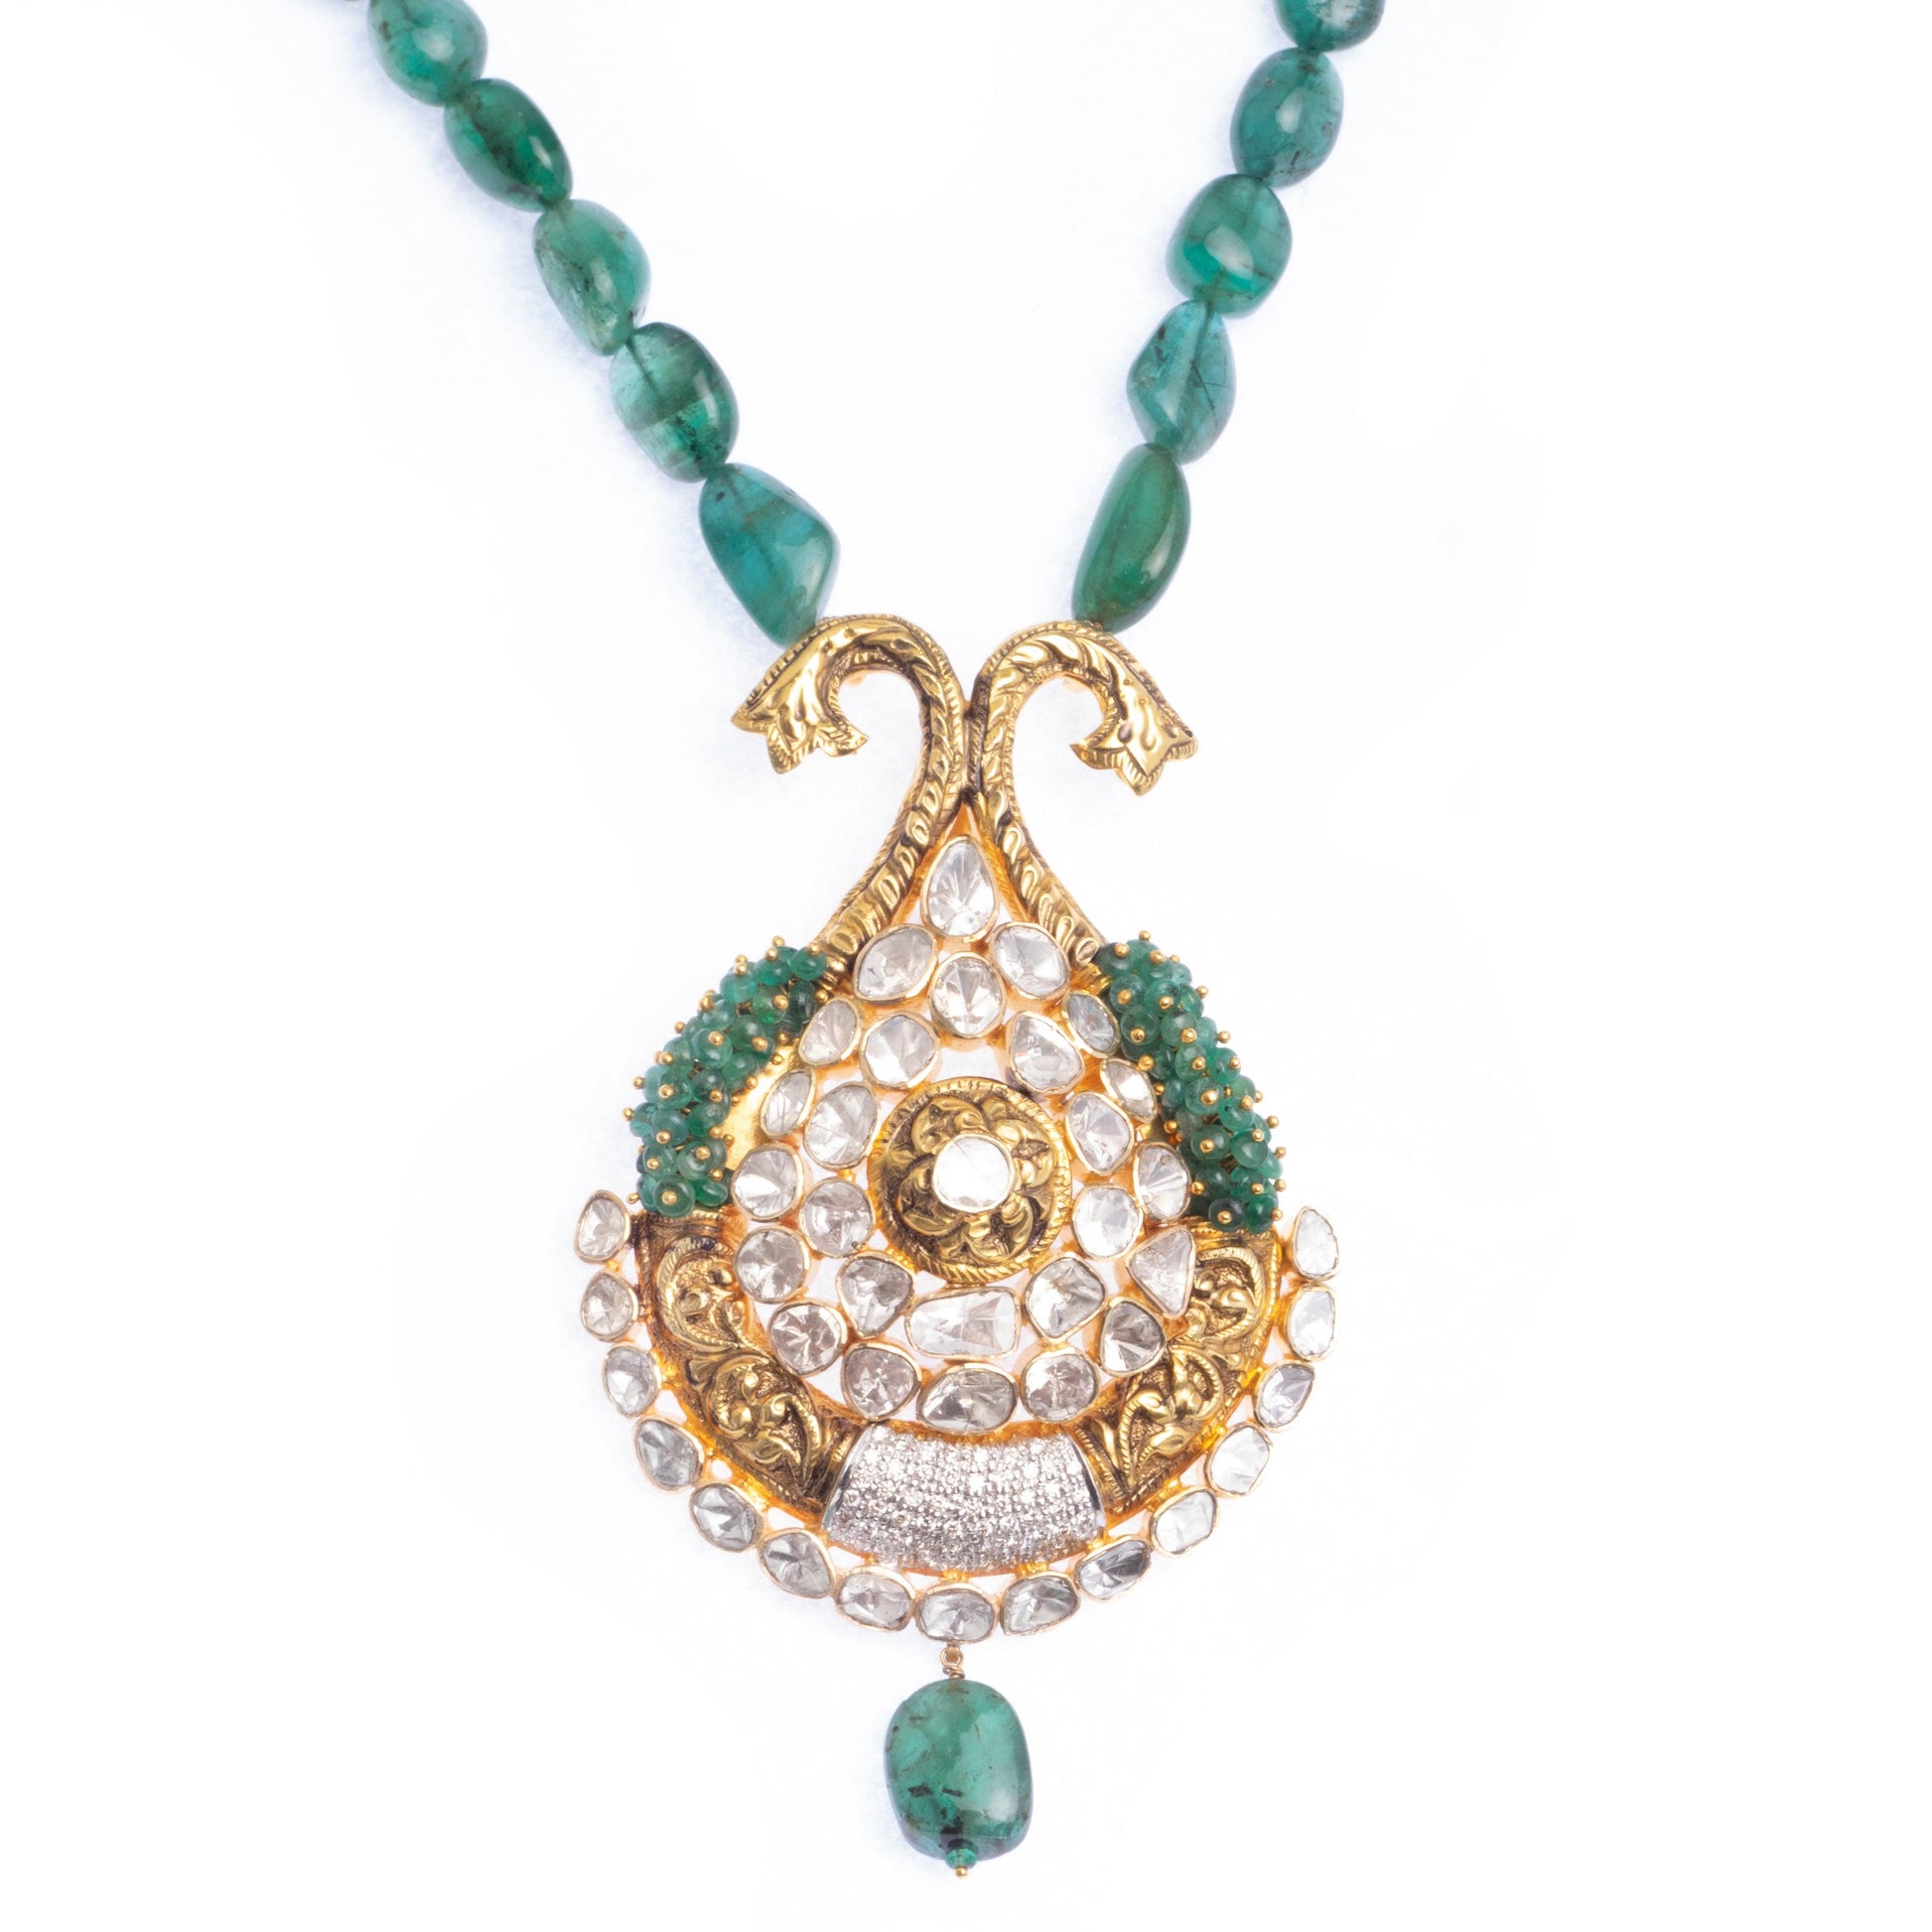 18ct Yellow Gold Polki Diamond and Emerald Necklace and Earrings Suite VPE-0818506 - Minar Jewellers